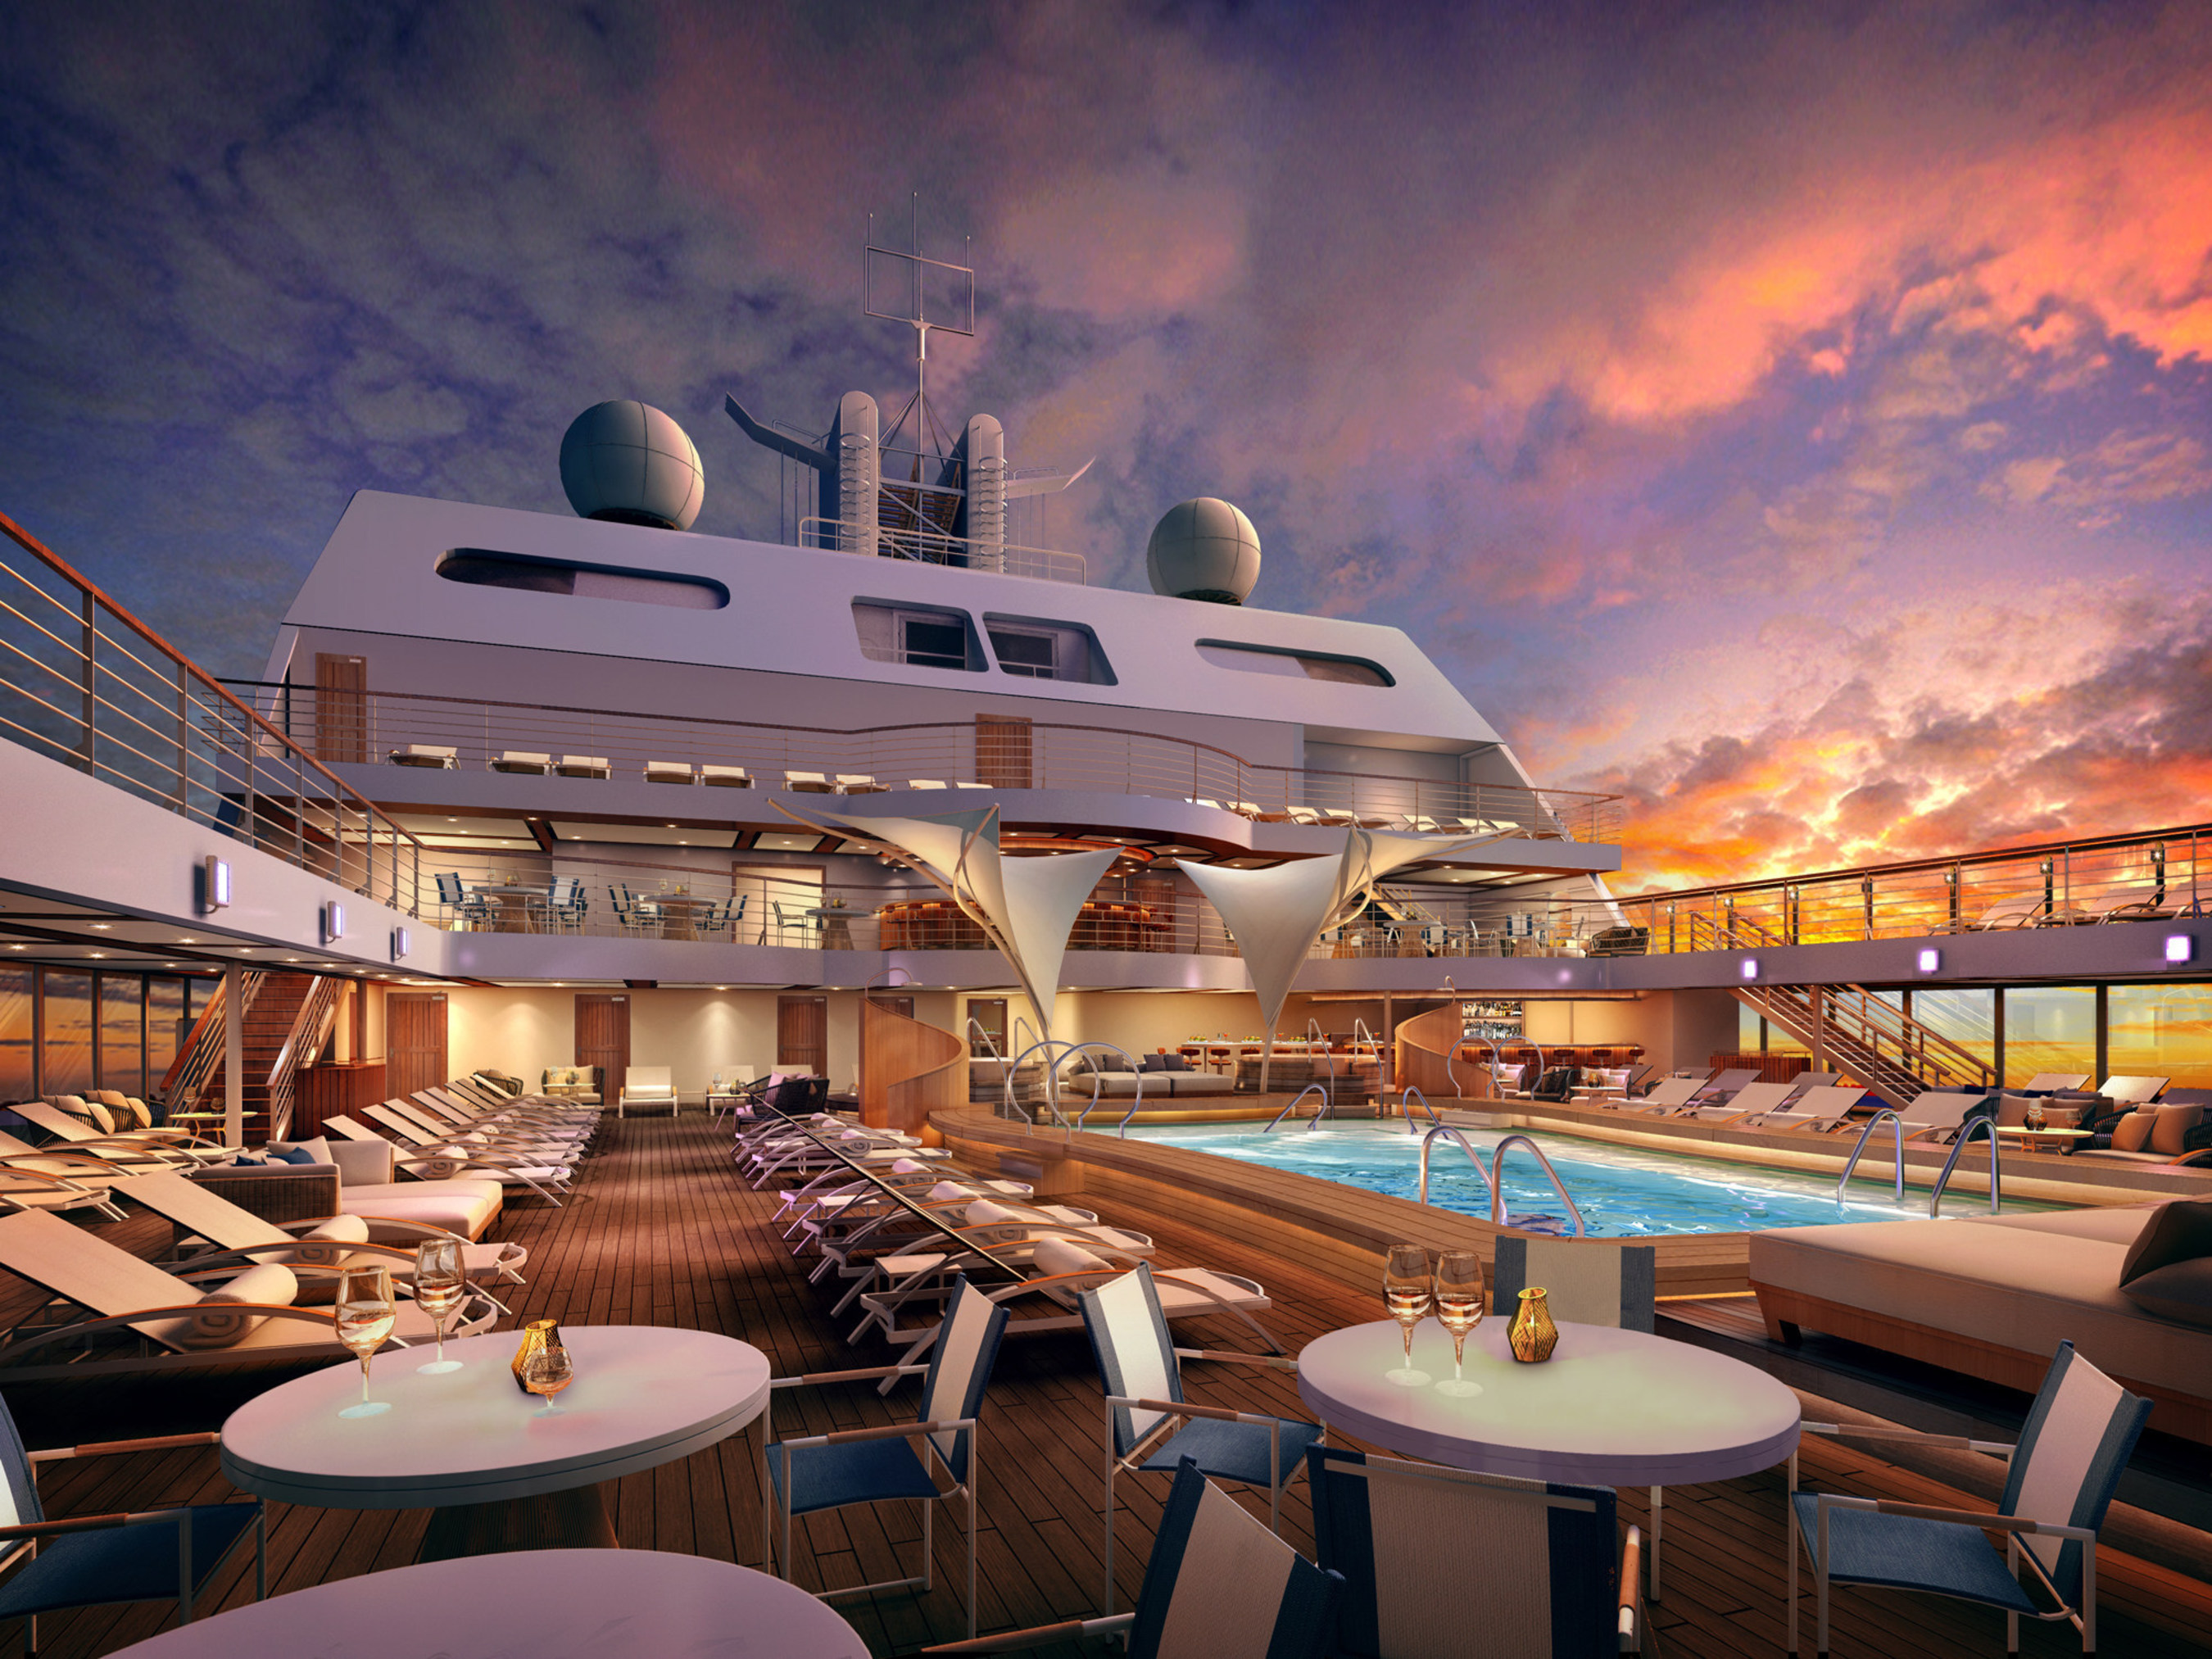 Seabourn Unveils Names Of Its Newest Ships: Seabourn Encore And Seabourn Ovation